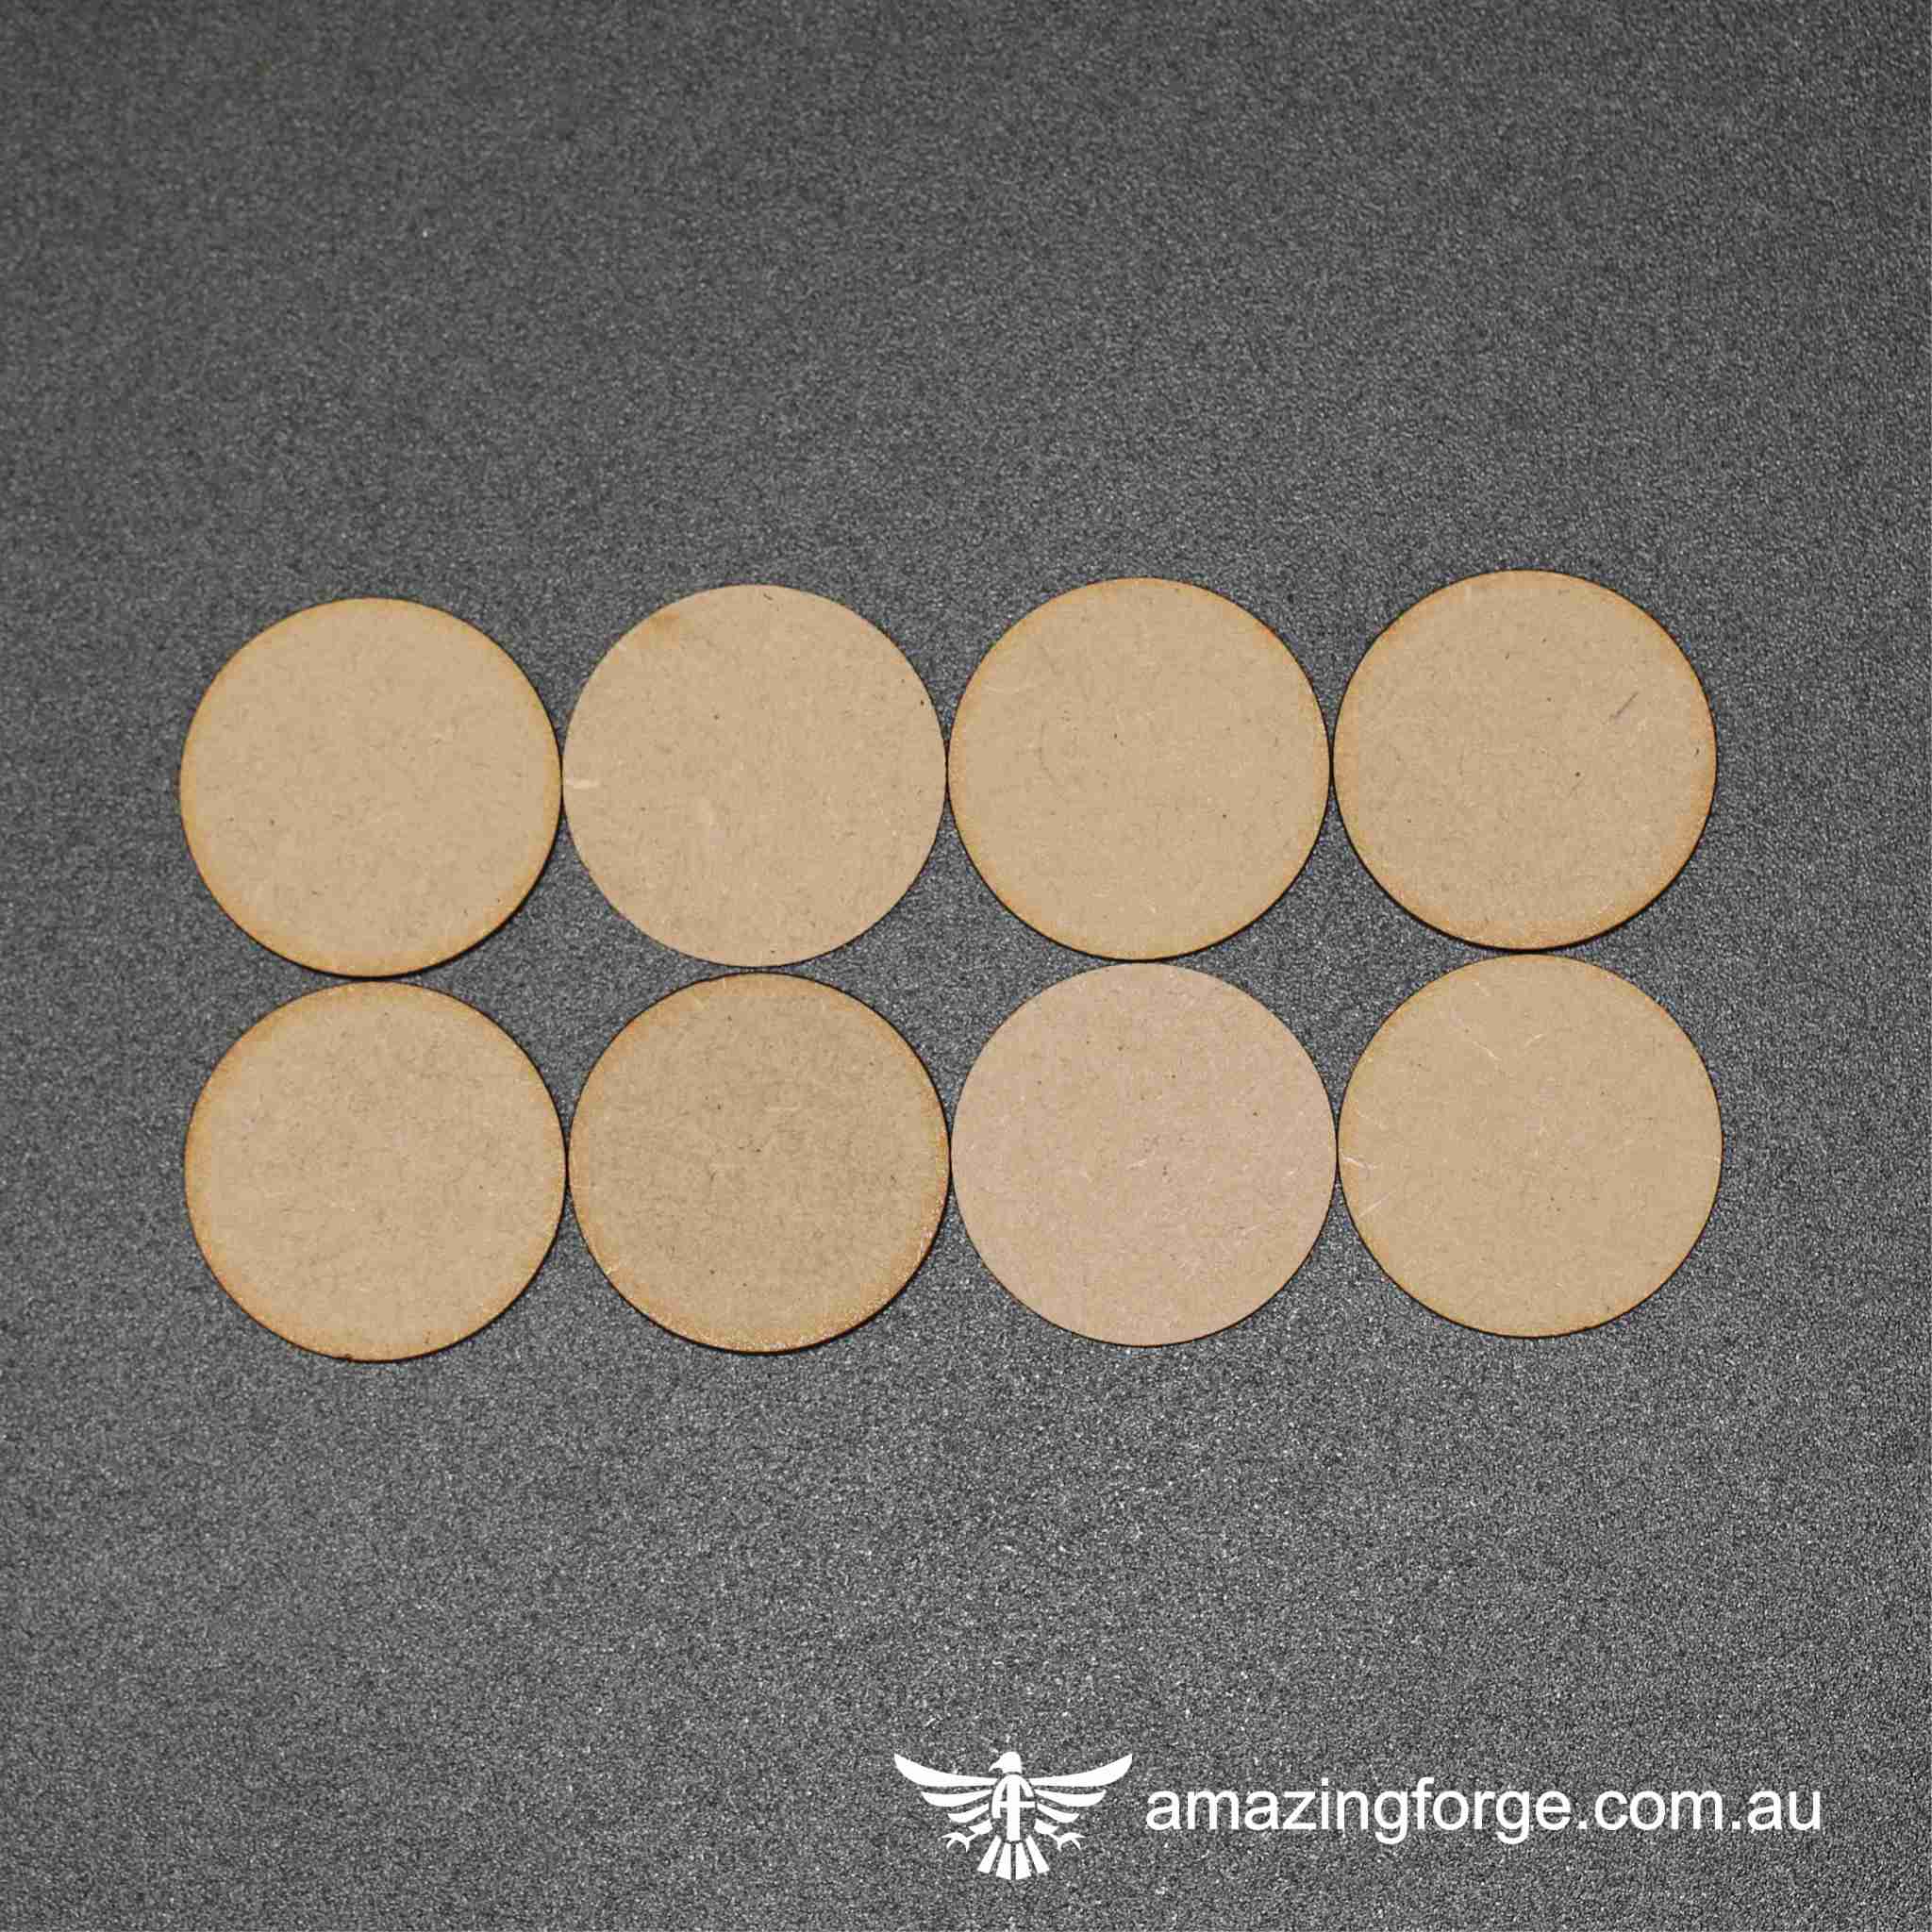 60mm Round Bases (qty 8)